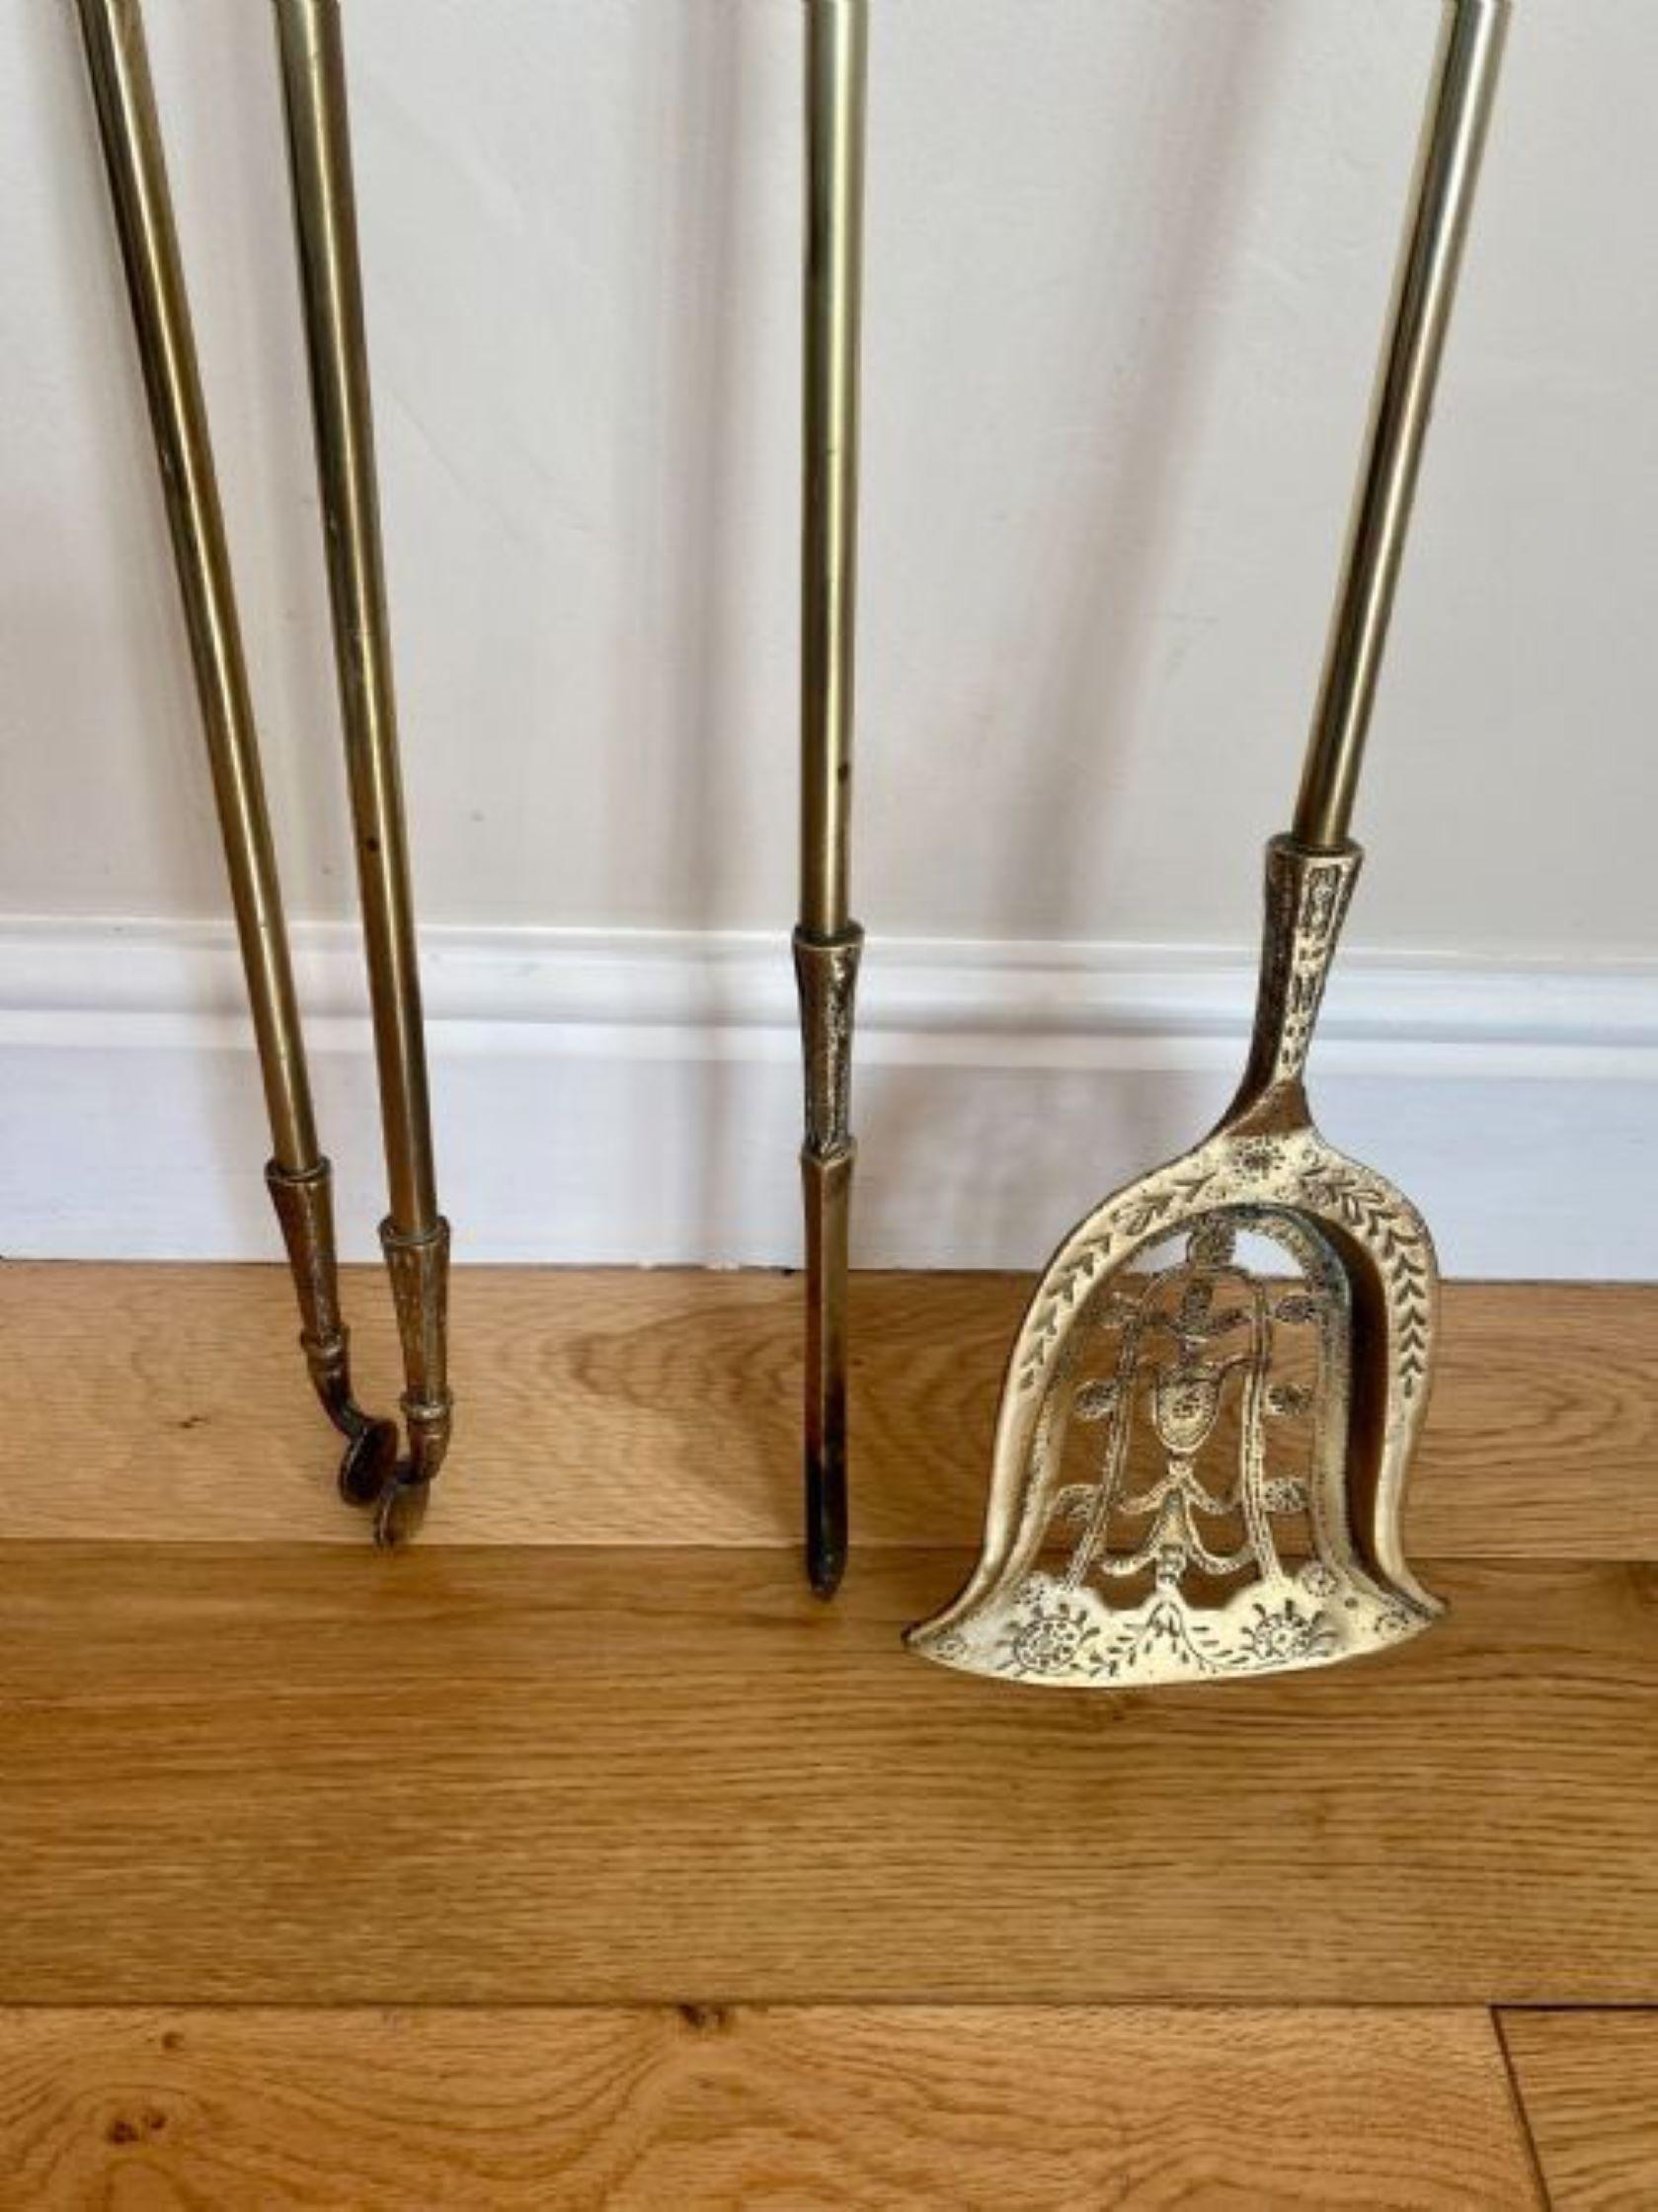 Set of Antique Victorian quality ornate brass fire irons, Consisting of a shovel, poker and a pair of fire tongs with quality ornate brass handles.